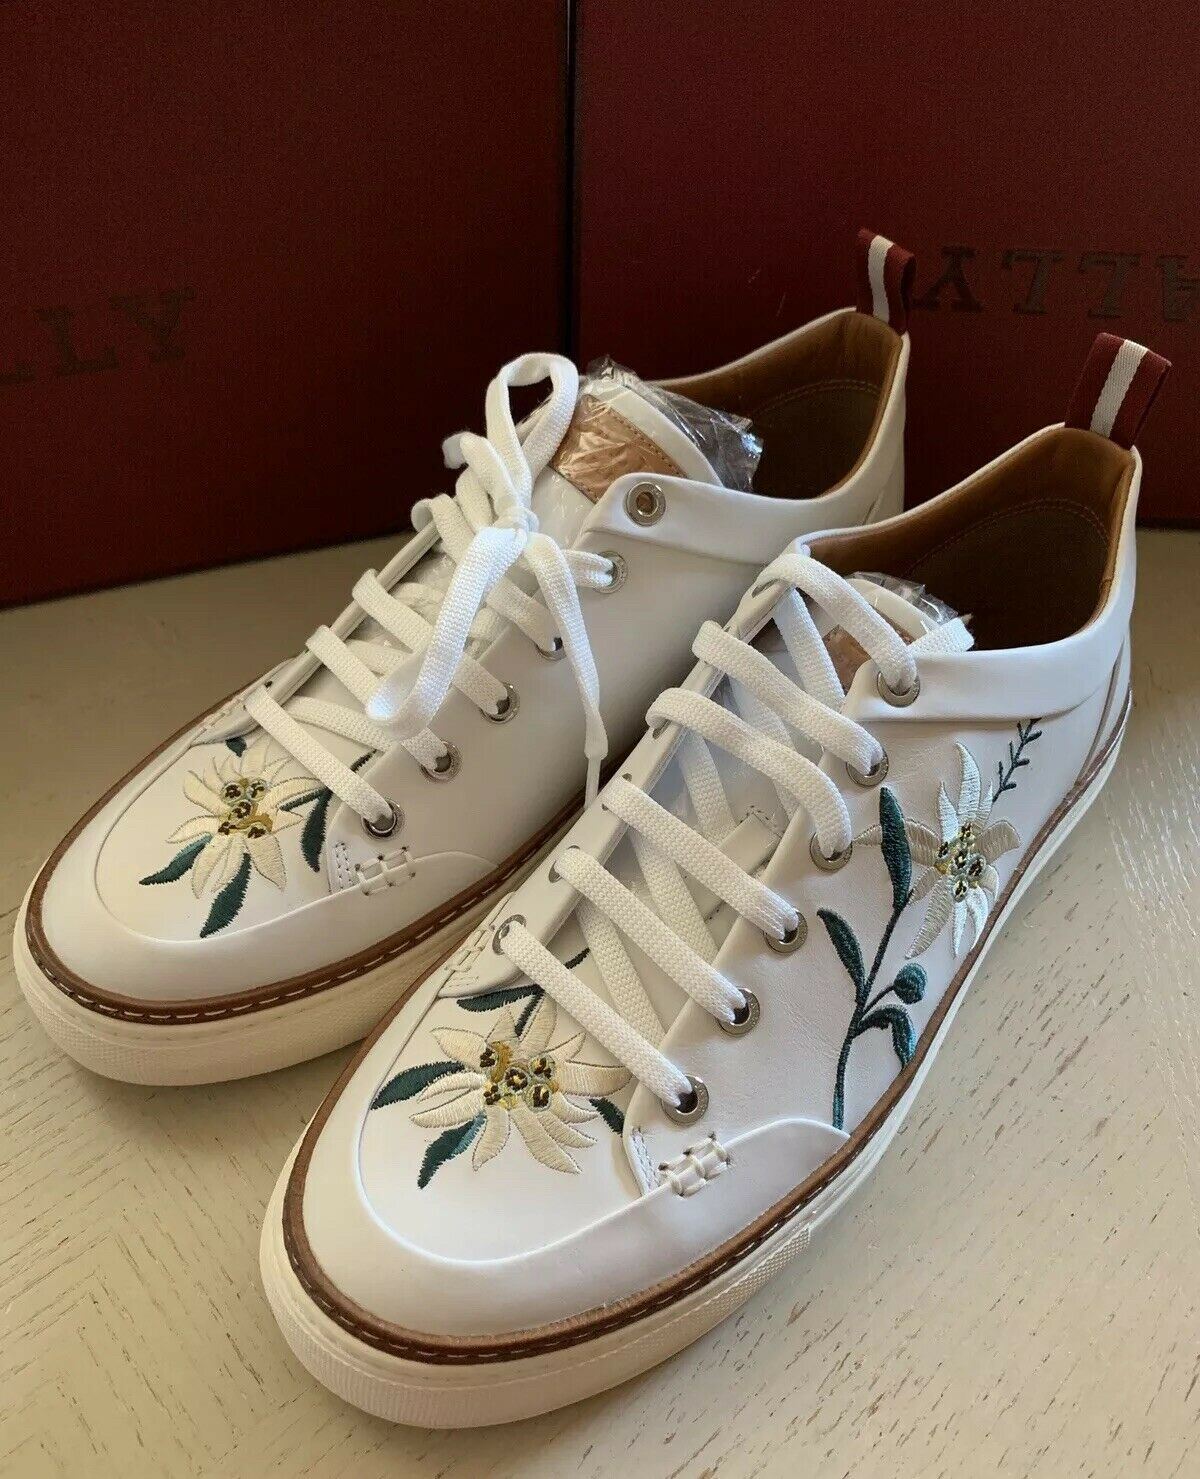 New $650 Bally Men Hernando Leather Sneakers Shoes Color White 13 US Switzerland